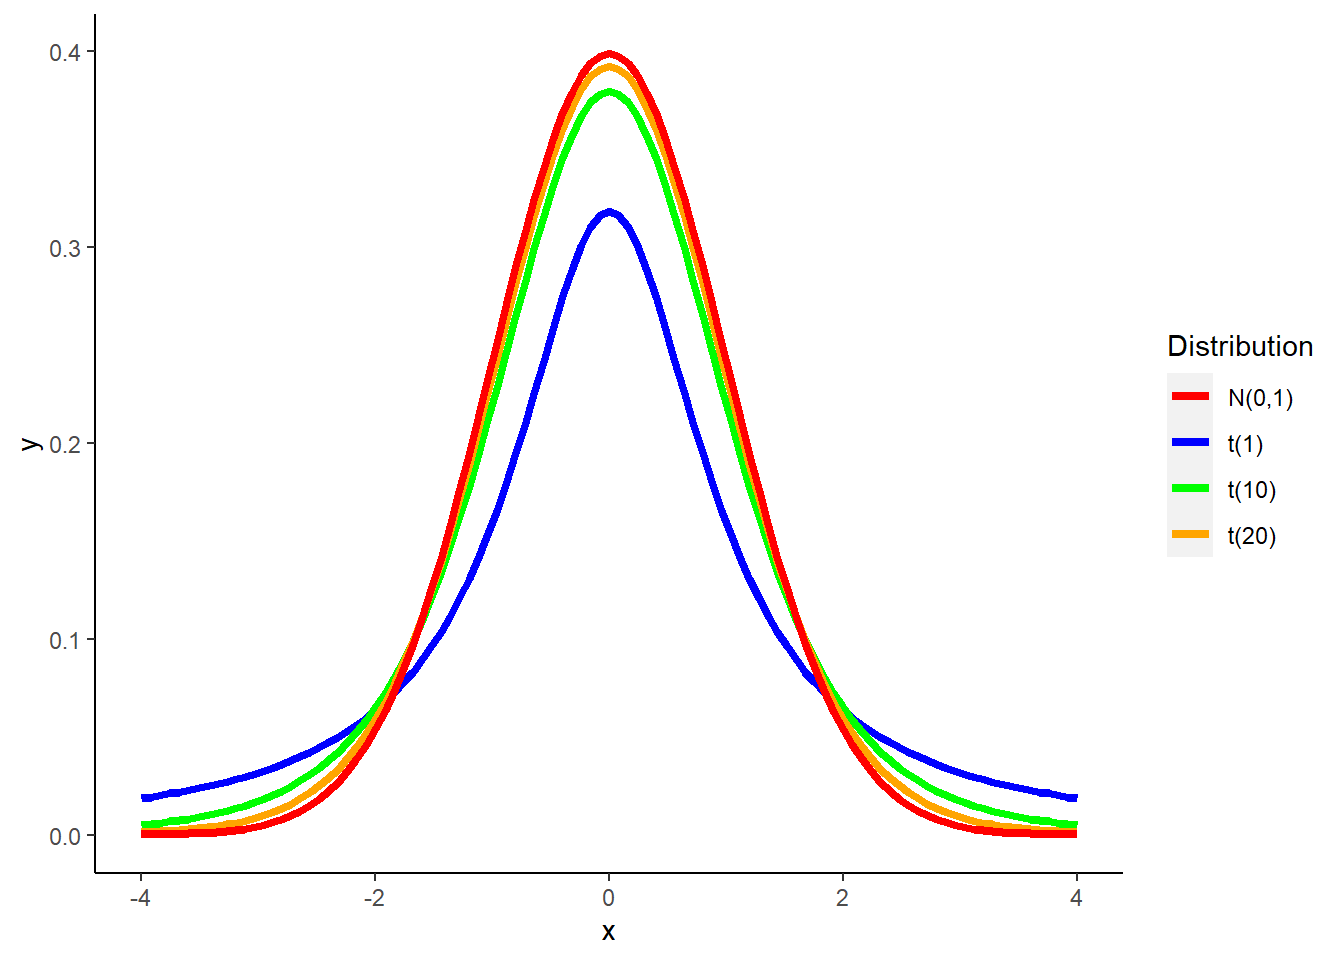 The Student's t-distribution with different degrees of freedom compared to the standard normal N(0,1) distribution.